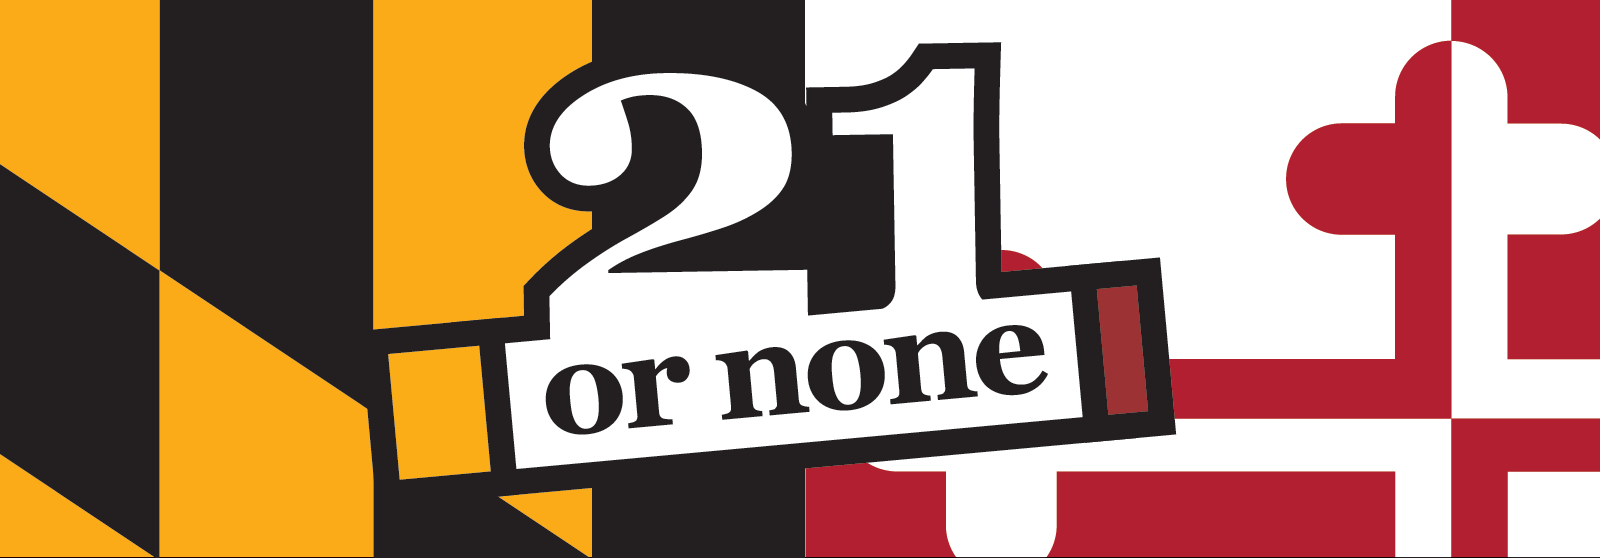 21 or None banner image.PNG